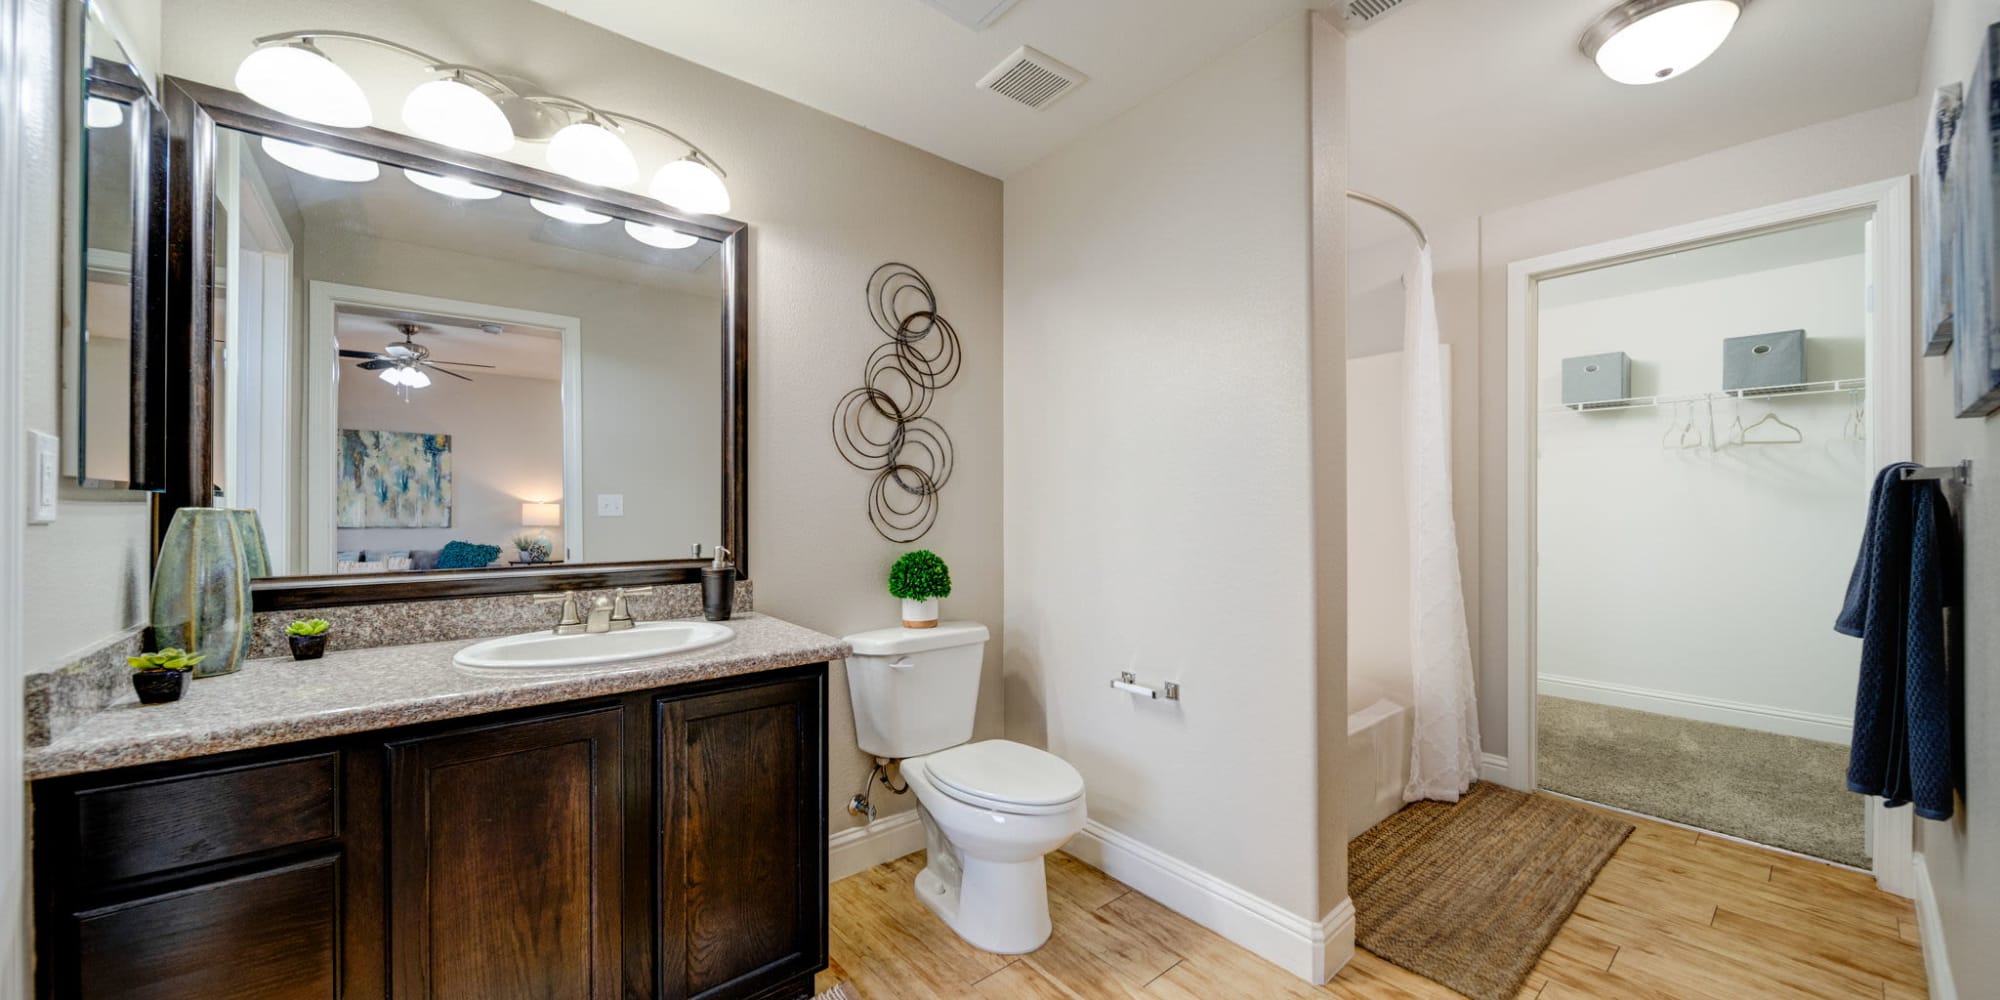 Bathroom with granite countertops at The Trails at Pioneer Meadows in Sparks, Nevada